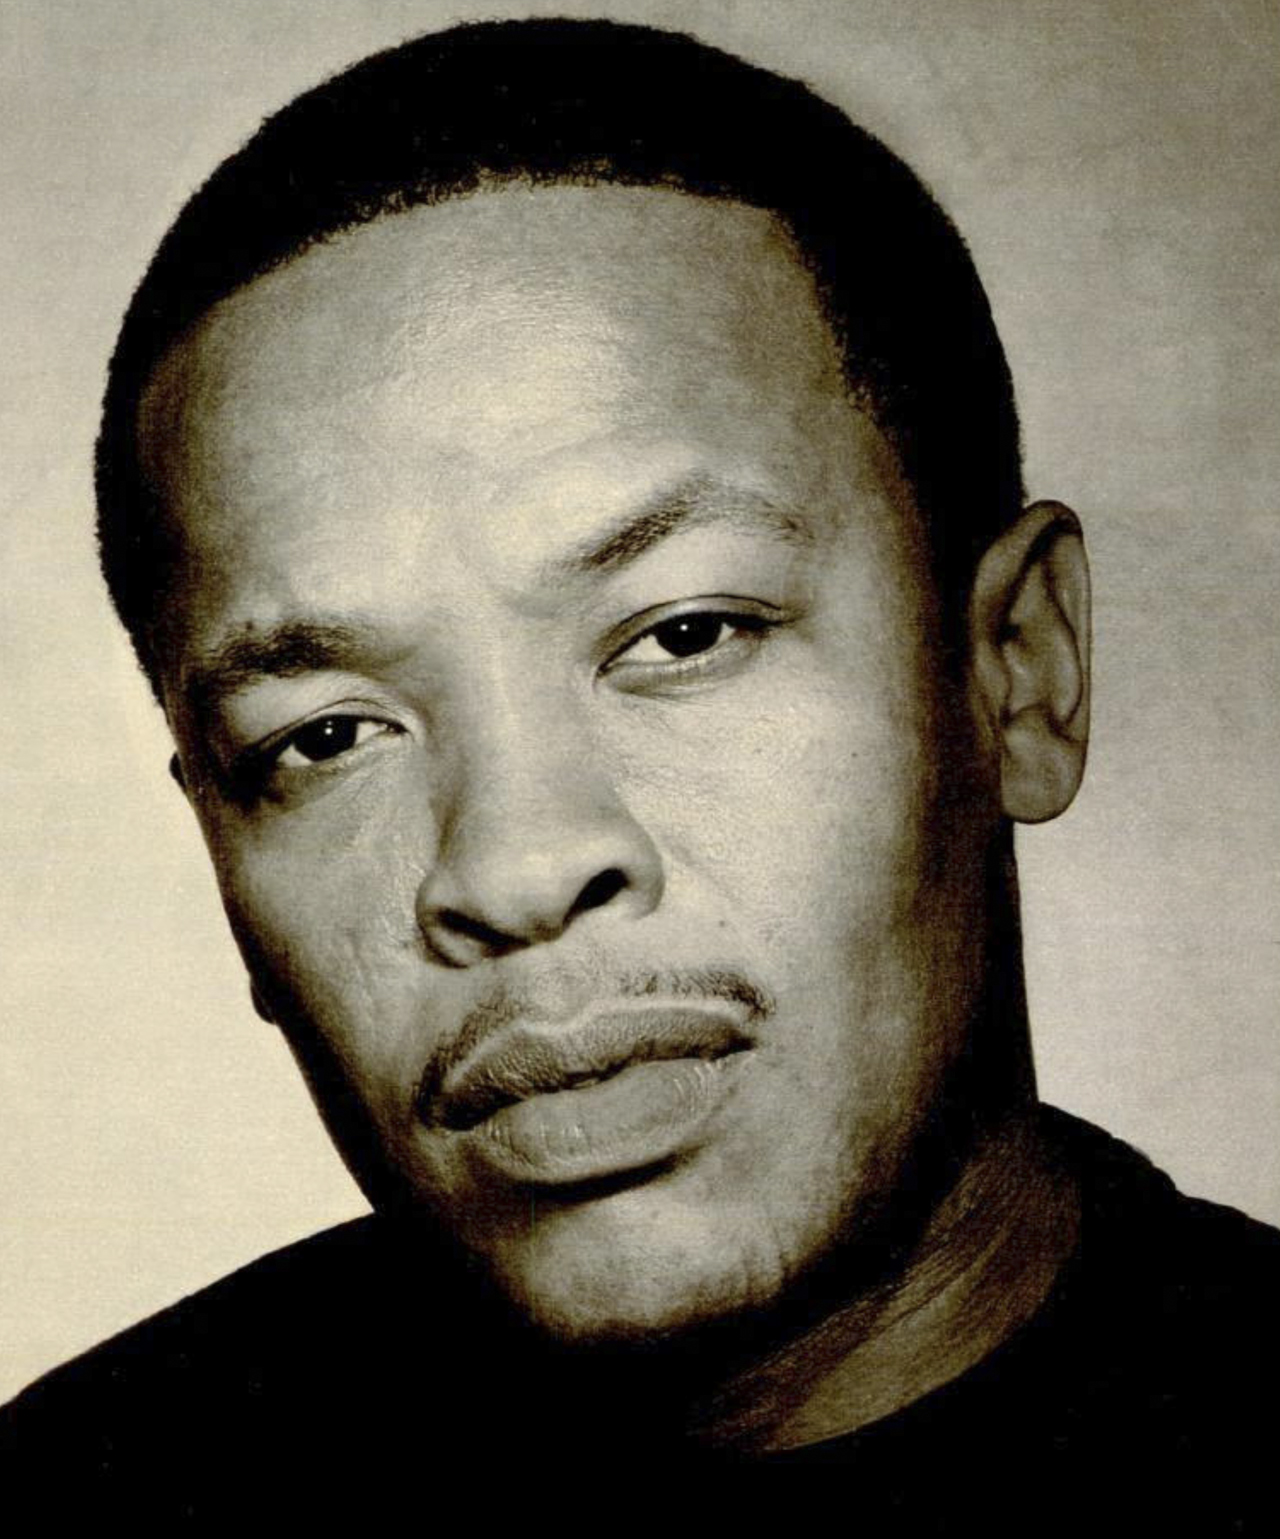 Dr. Dre - 2001 (20 years later)